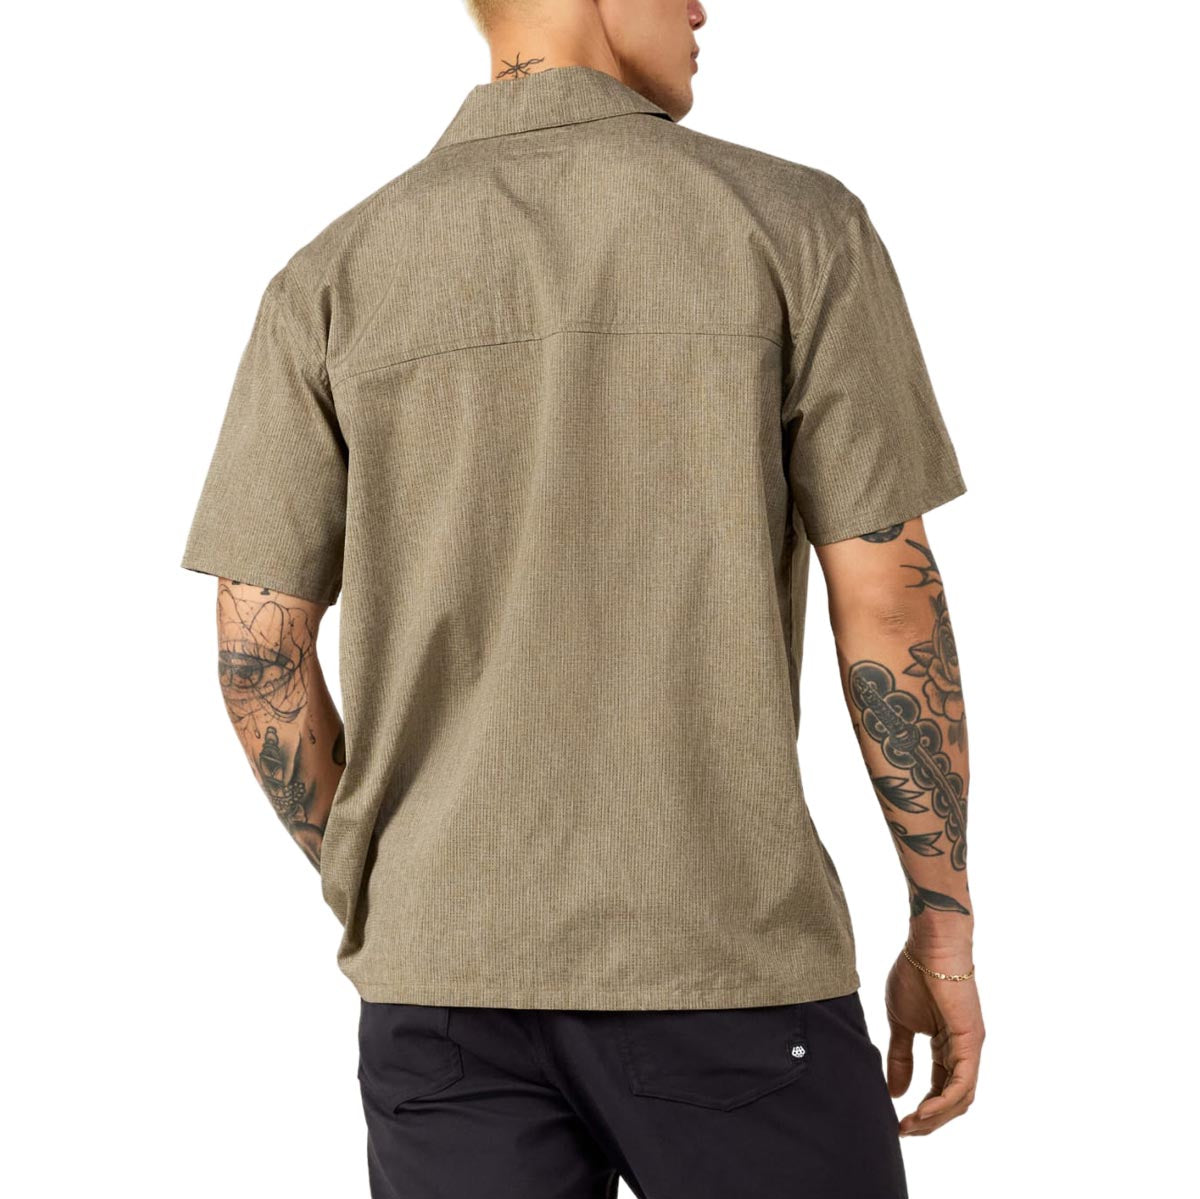 686 Canopy Woven Shirt - Heather Dusty Fatigue image 2